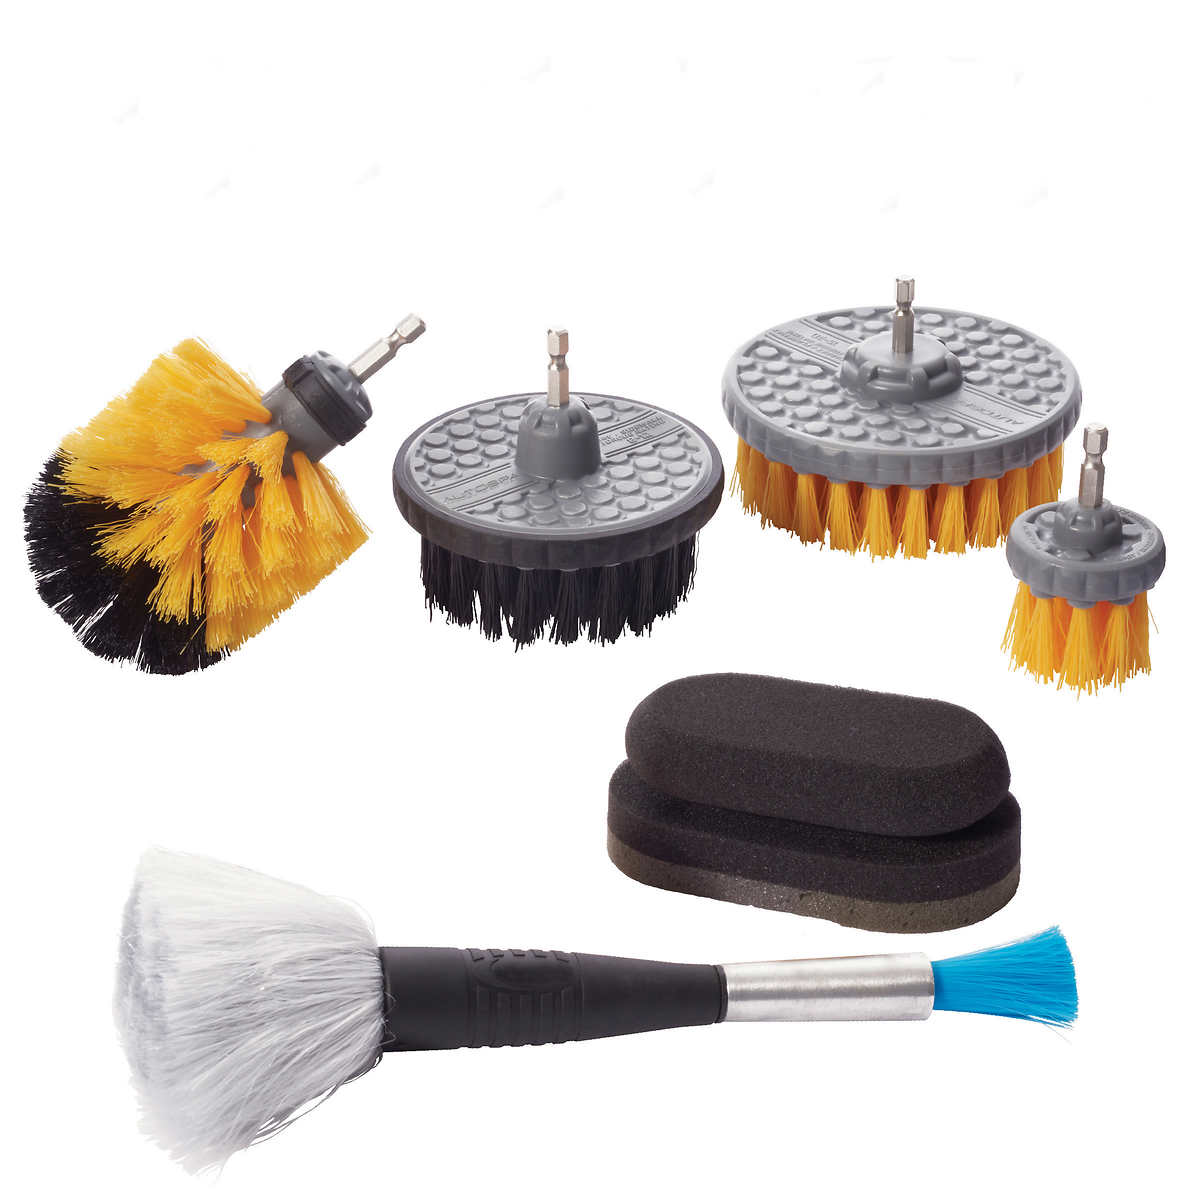 Speed-Brush Drill Powered Cleaning Kit, 6-Piece set